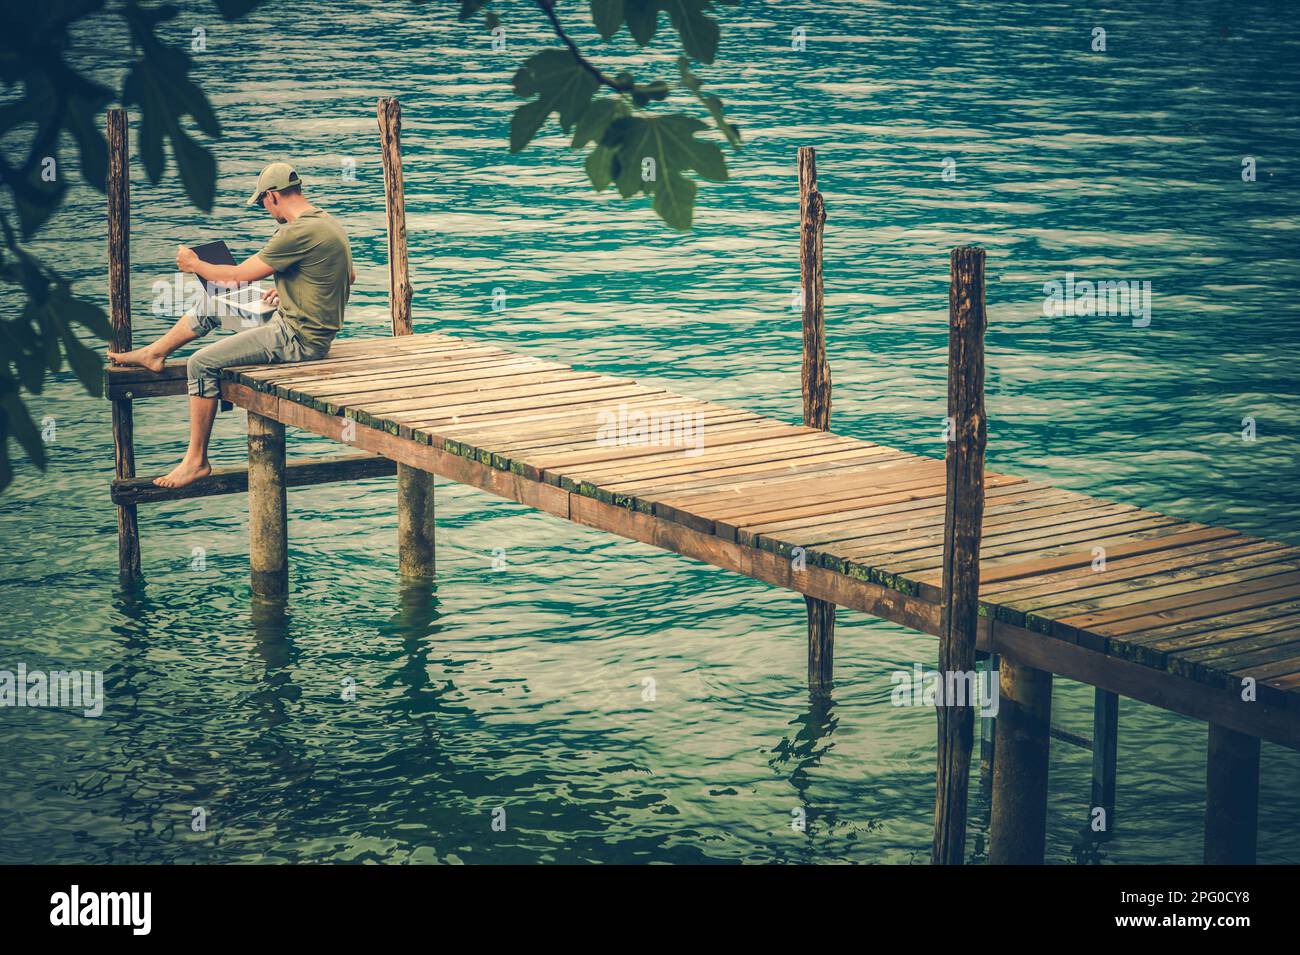 Computer Remote Work While on Vacation. Caucasian Man Using His Computer in Front of Scenic Lake. Seating on Wooden Pier Deck. Stock Photo